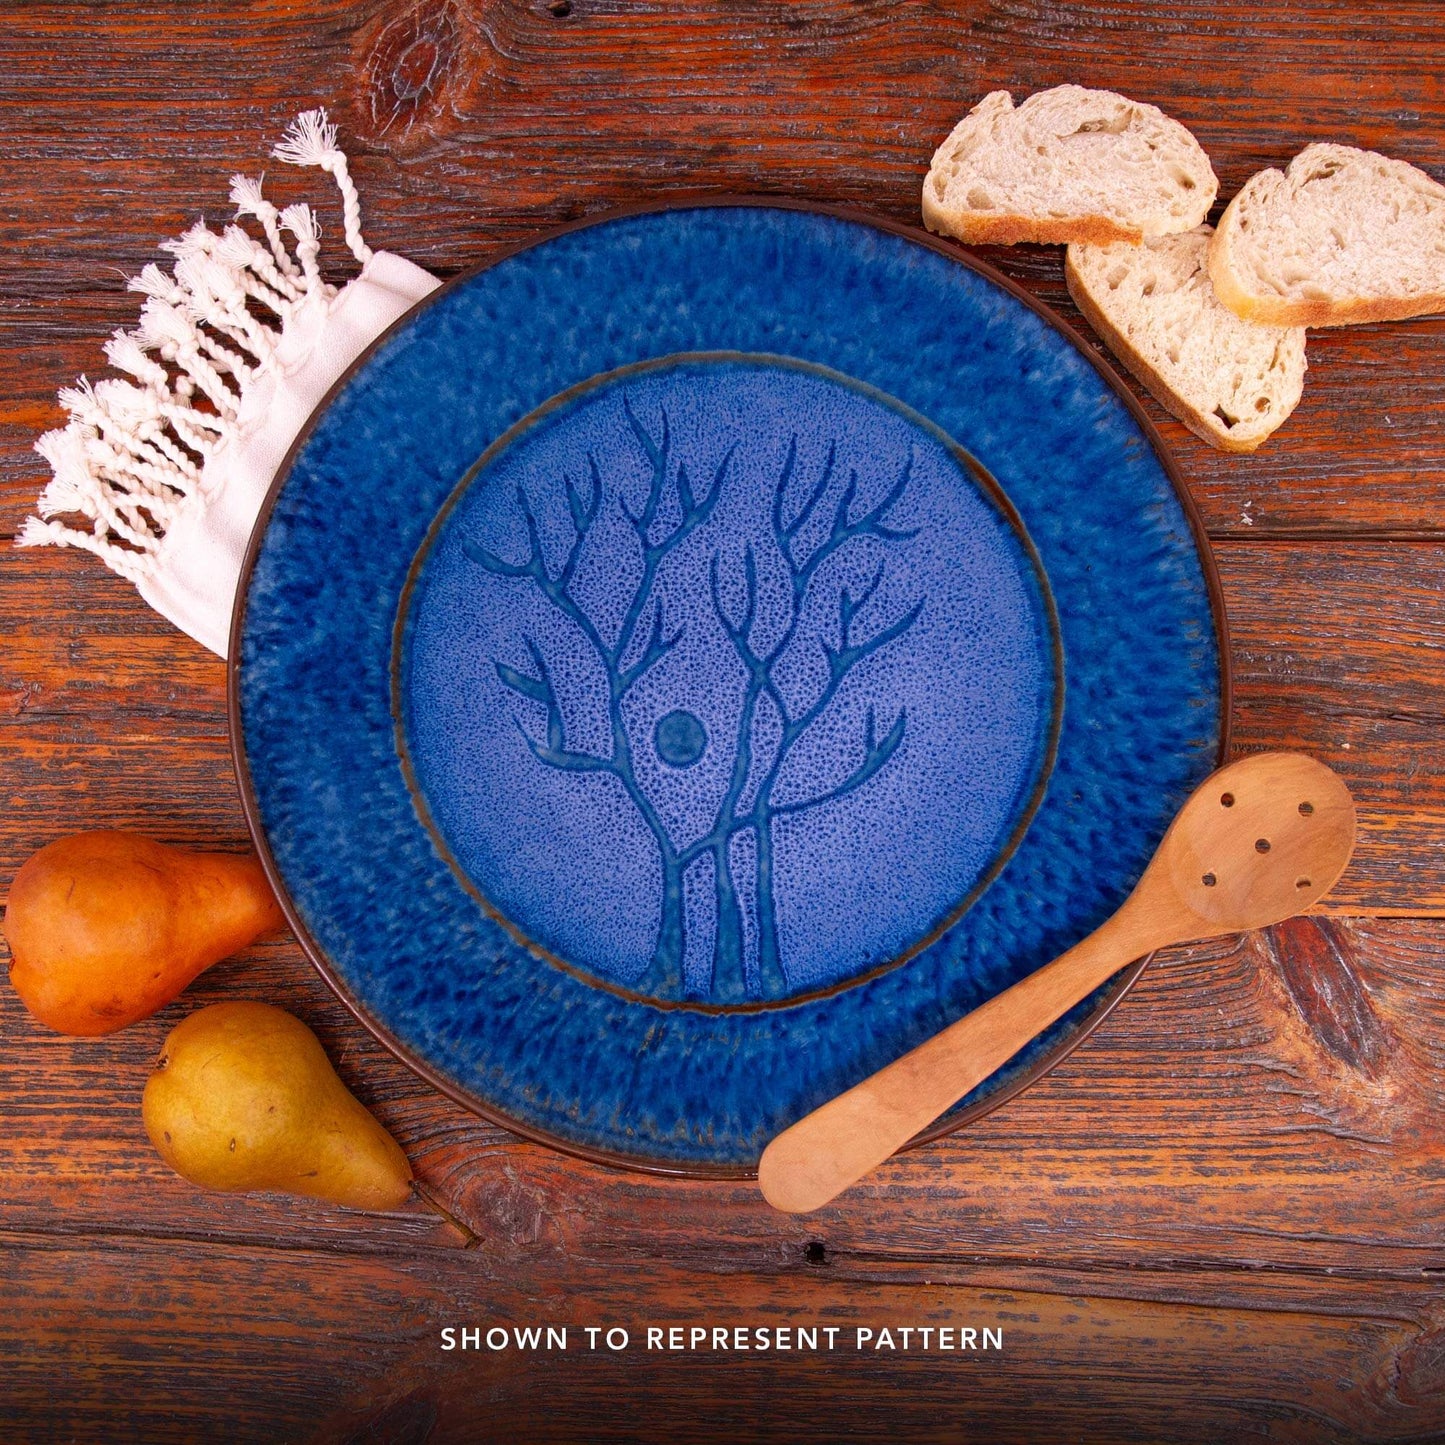 Handmade Pottery Tapas Plate in Blue Tree pattern made by Georgetown Pottery in Maine